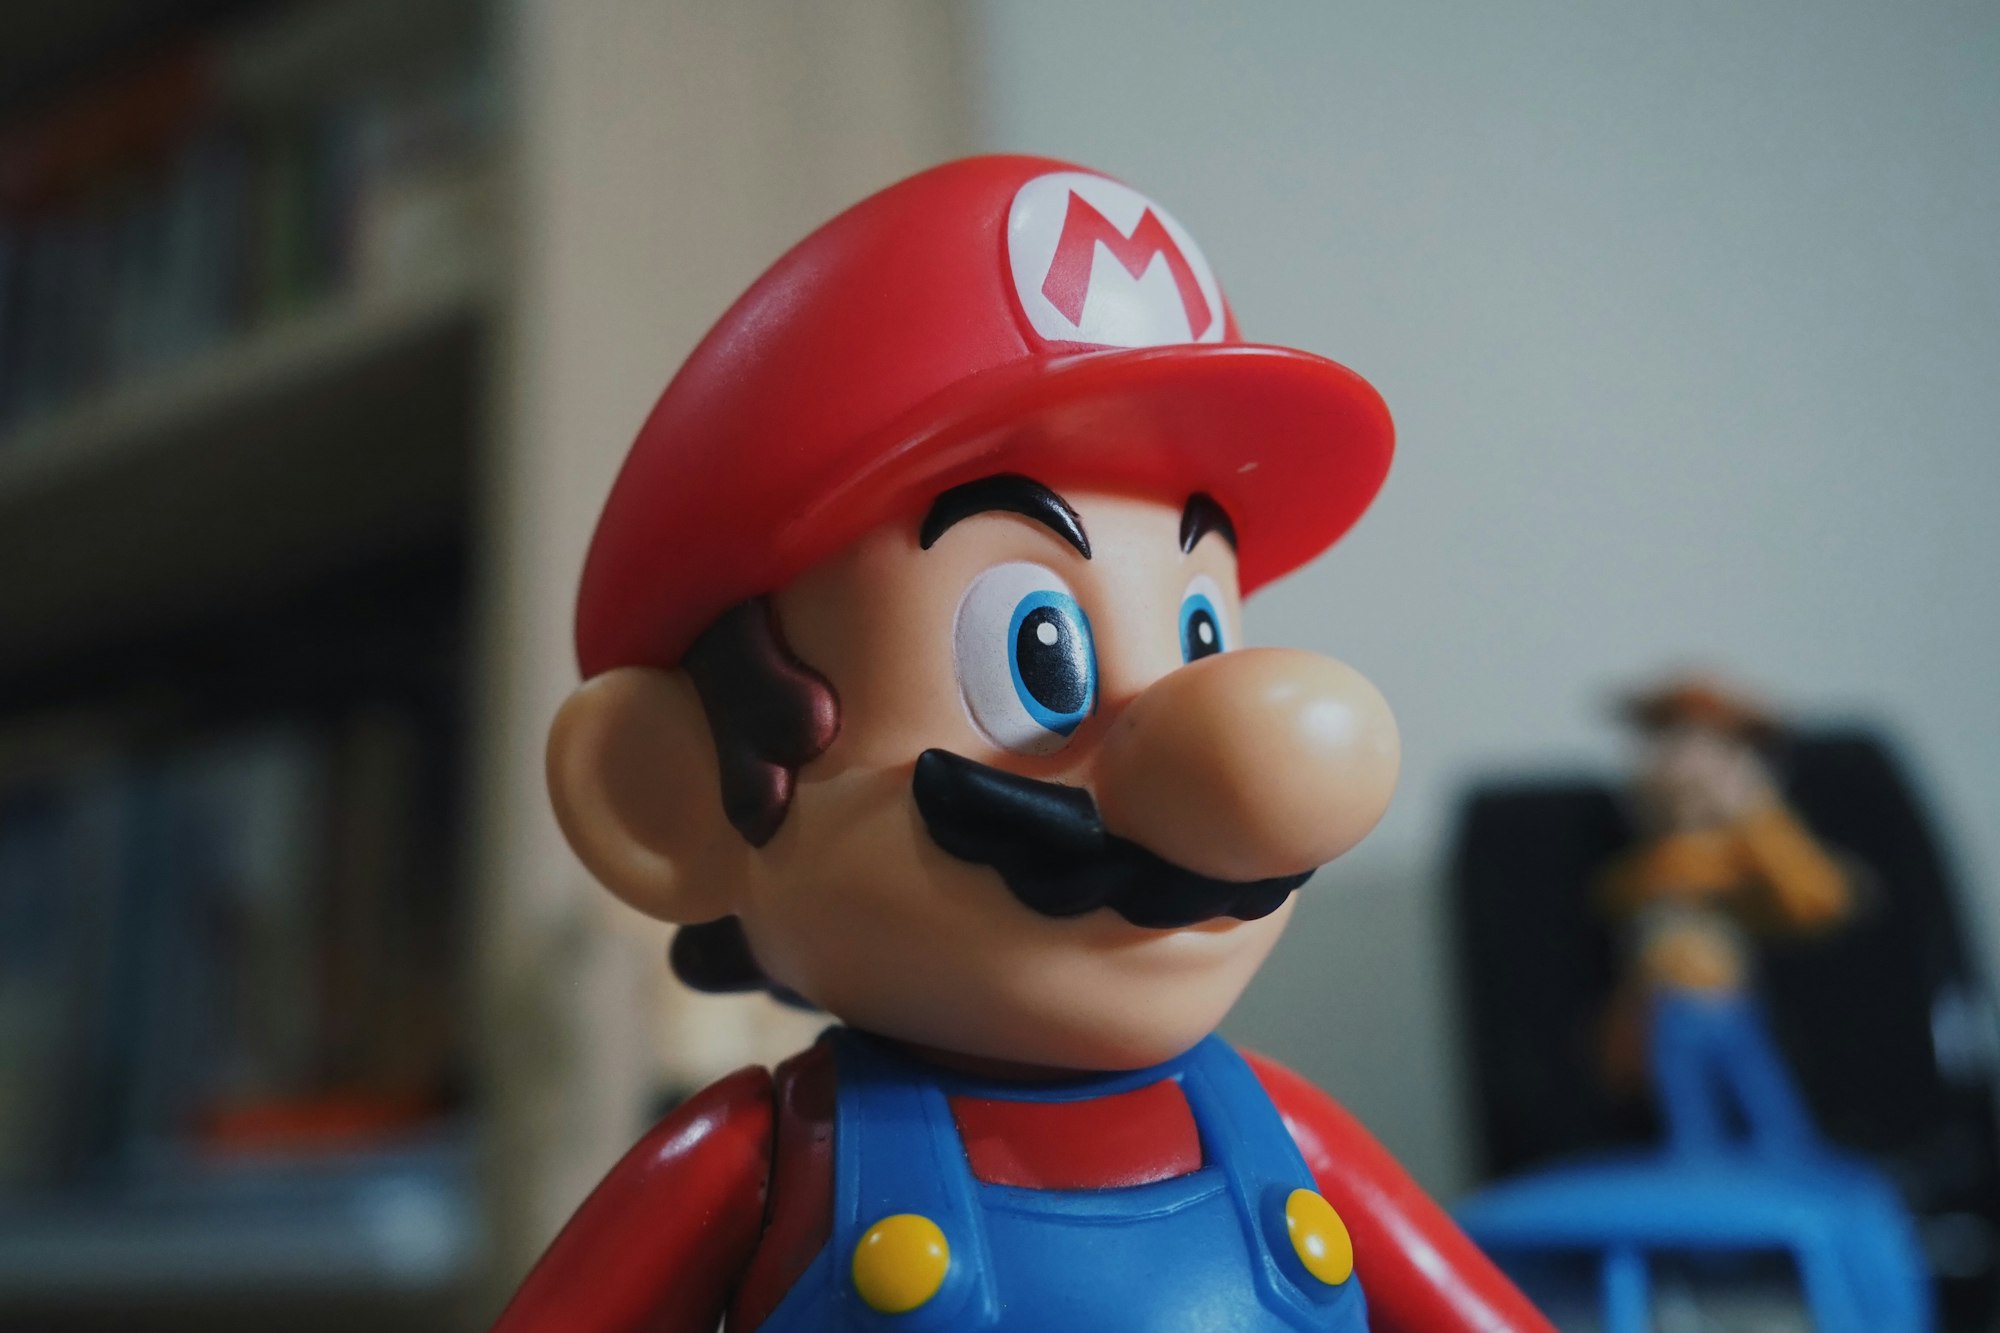 The Legendary Naming of Mario: A Tale of Coins, Creativity, and Unexpected Inspiration